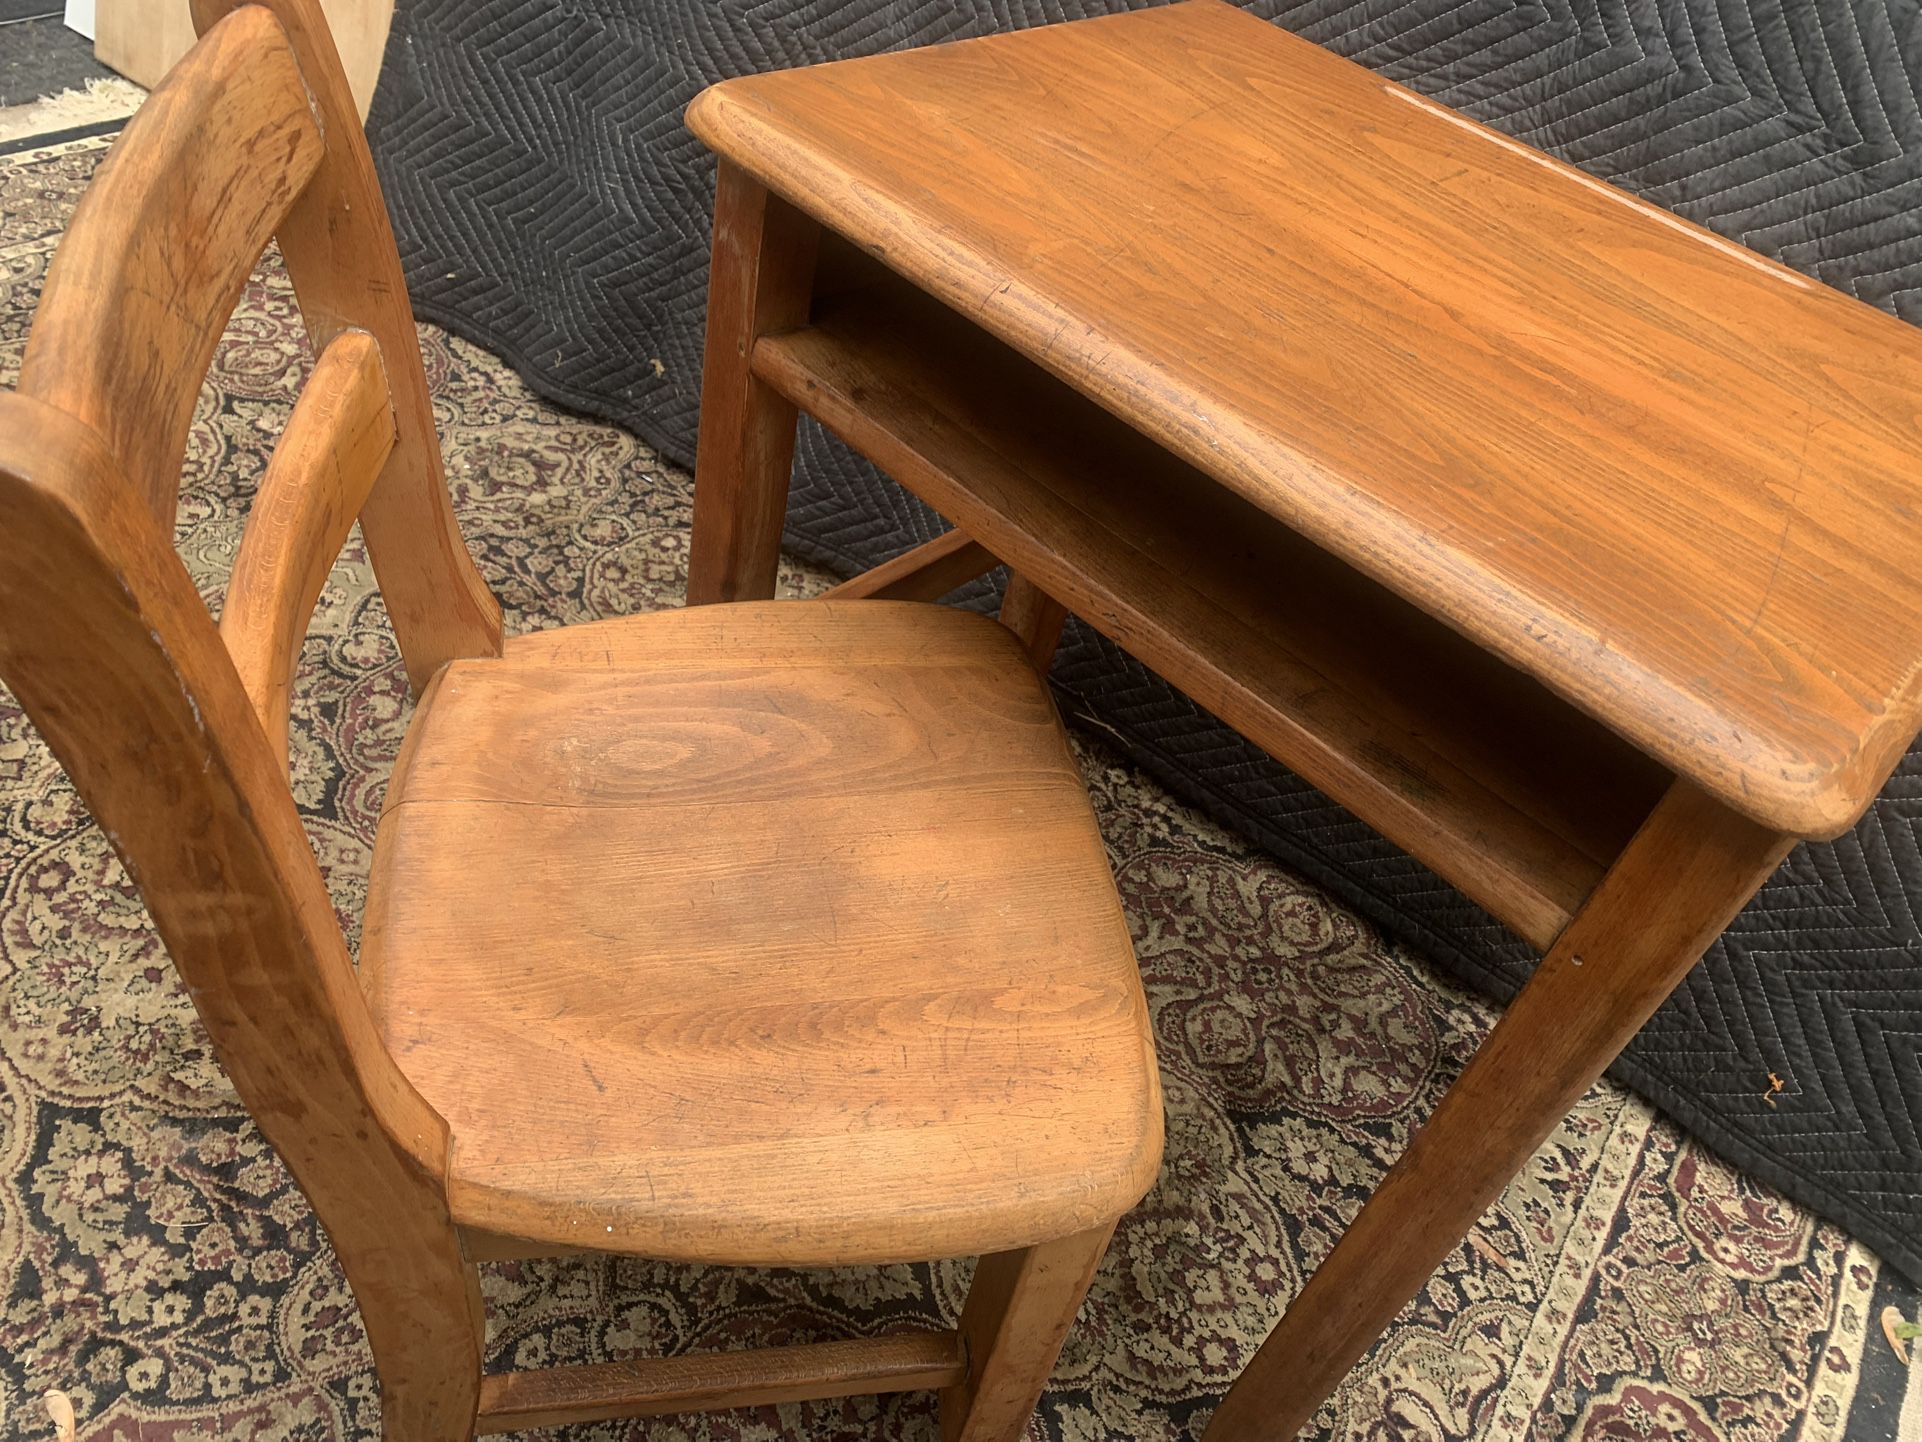 Vintage child desk and chair 23.5 W x 18 D x 26.5 H  Chair: 15 3/4 W x 15.5 D x 29 H  Seat@ 16